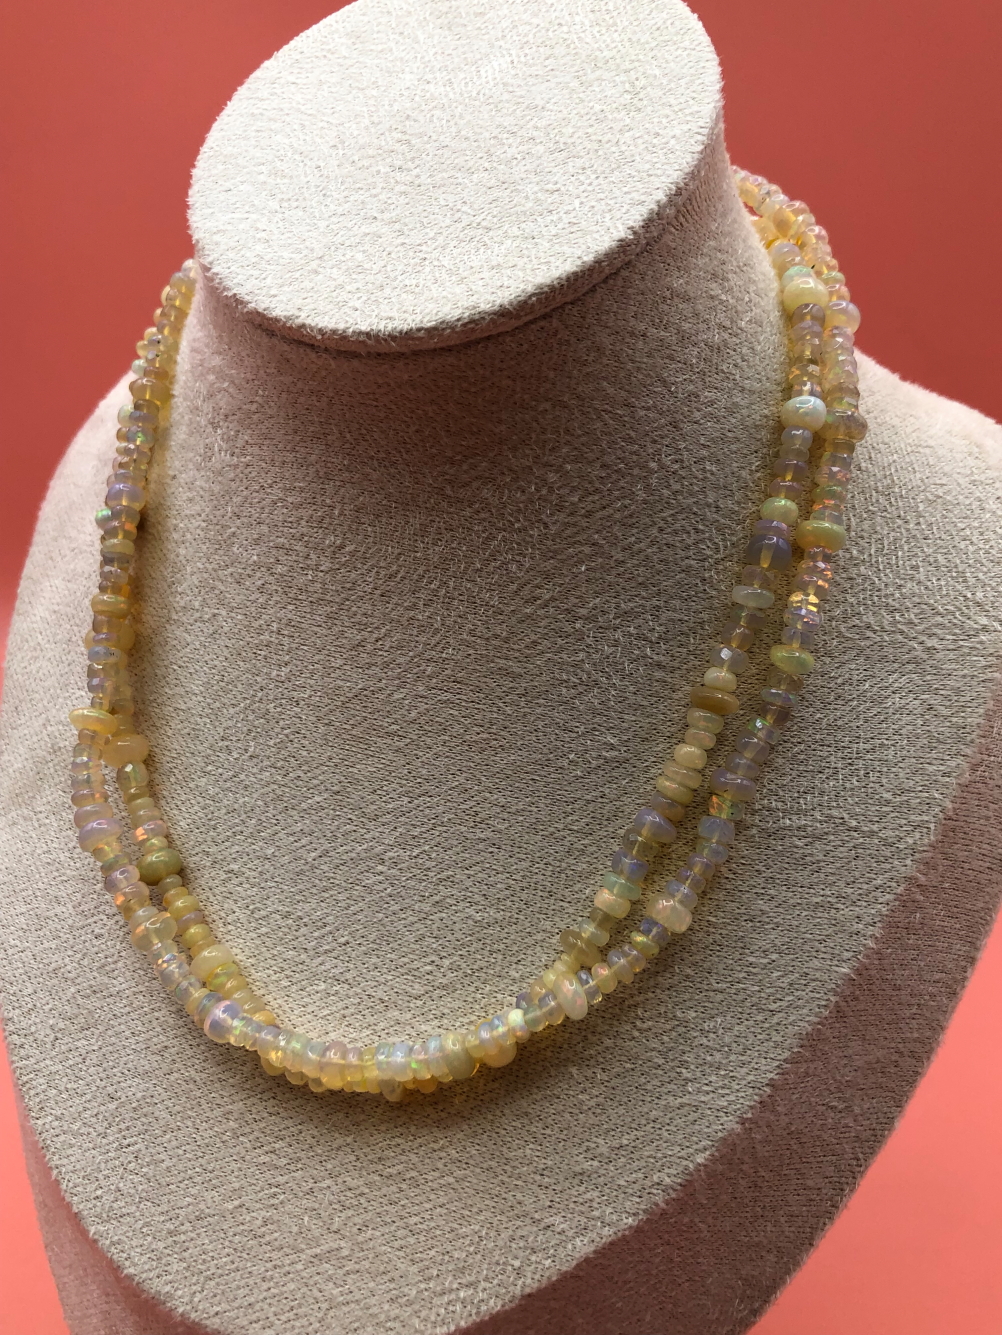 AN OPAL BEADED NECKLACE. VINTAGE OPAL ROUNDEL BEADS RECENTLY RESTRUNG. NECKLACE LENGTH 76cms. - Image 4 of 7